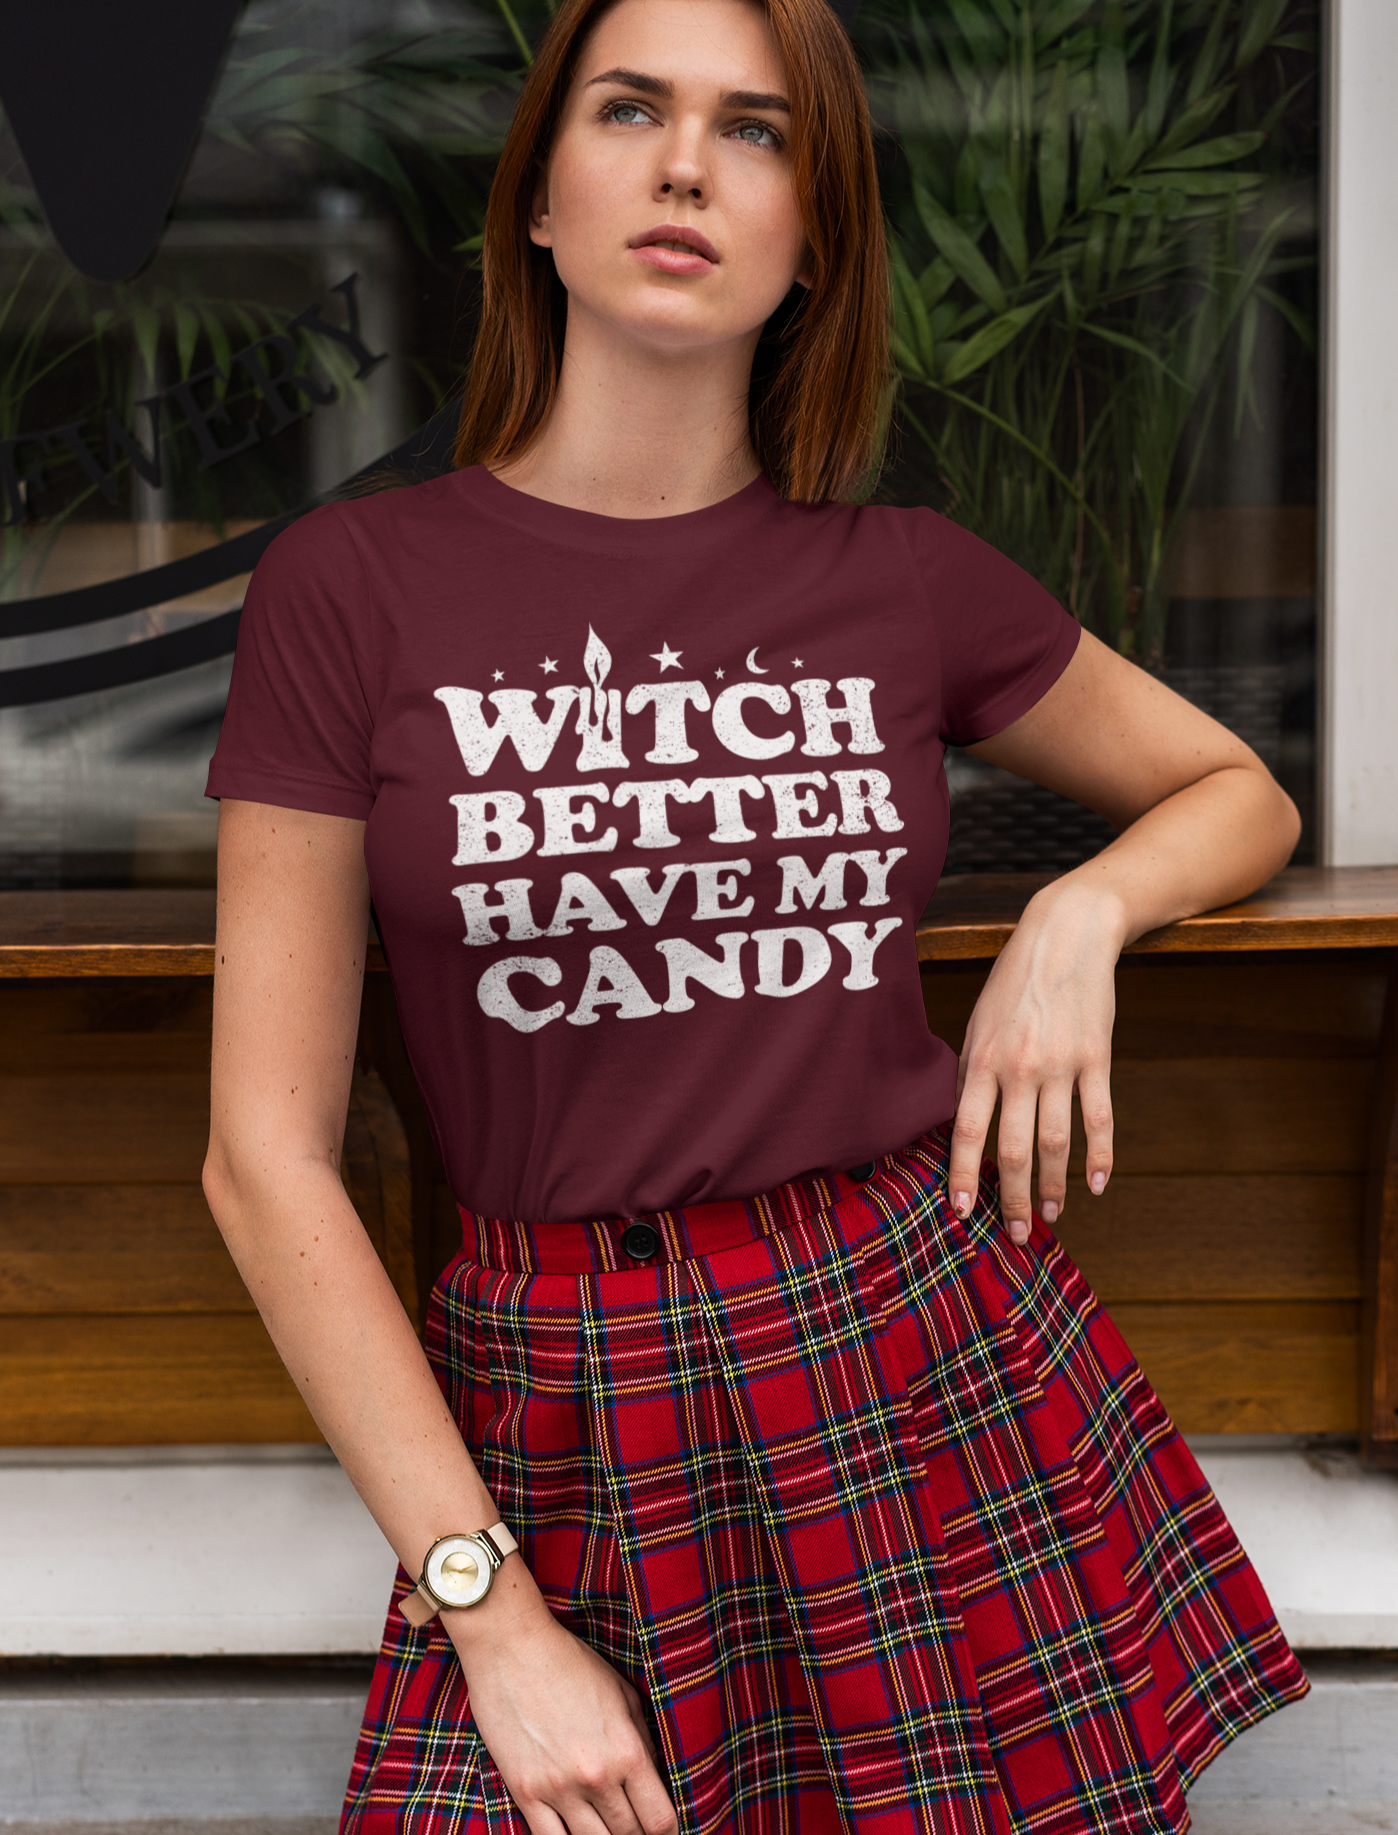 Maroon shirt saying witch better have my candy - HighCiti